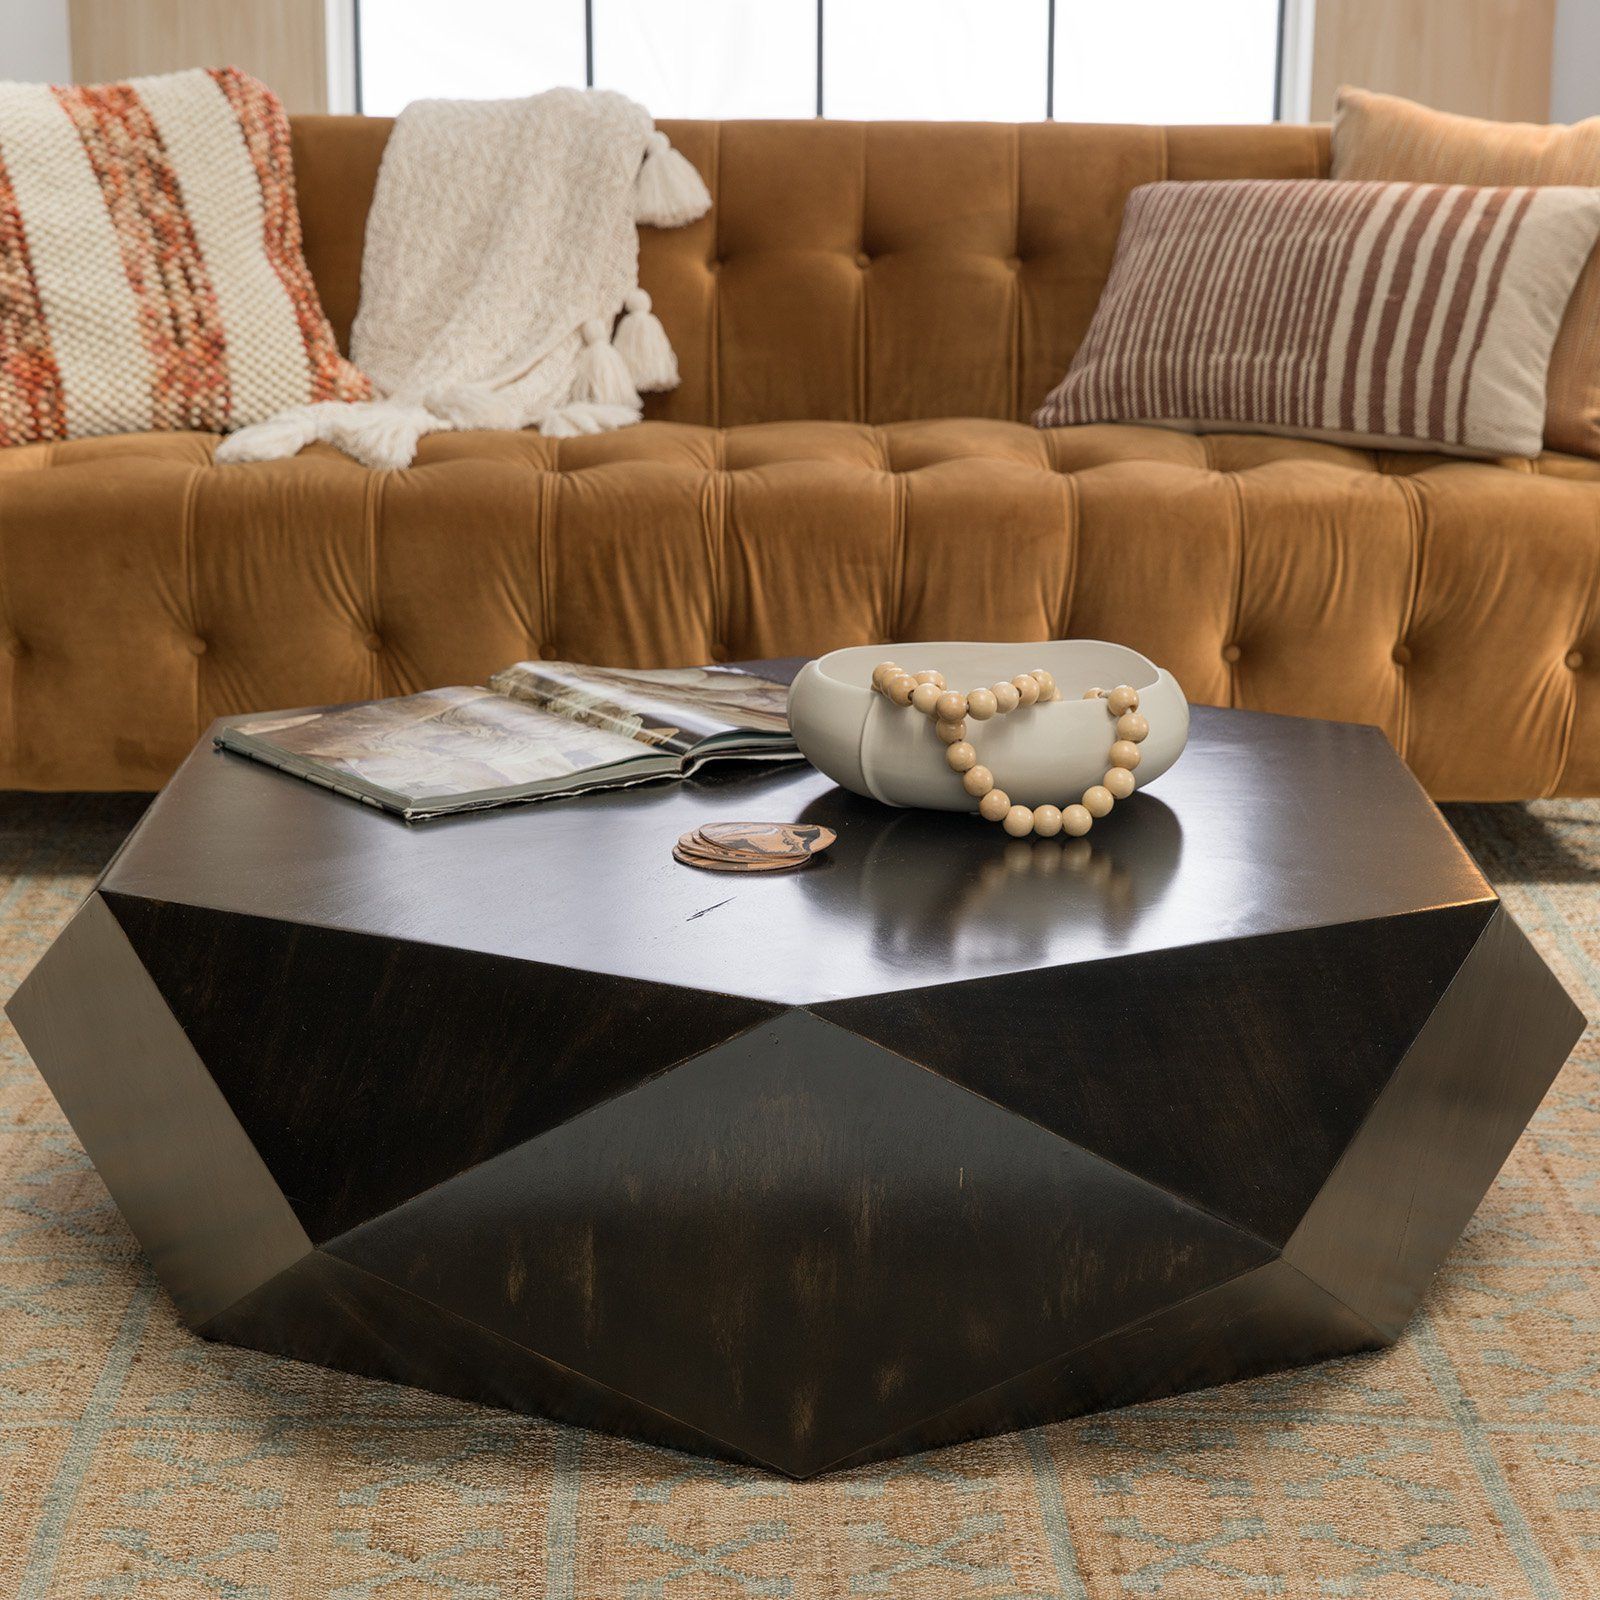 The Uttermost Volker Coffee Table With Its Modern Geometry Brings A Within Modern Wooden X Design Coffee Tables (Gallery 15 of 20)